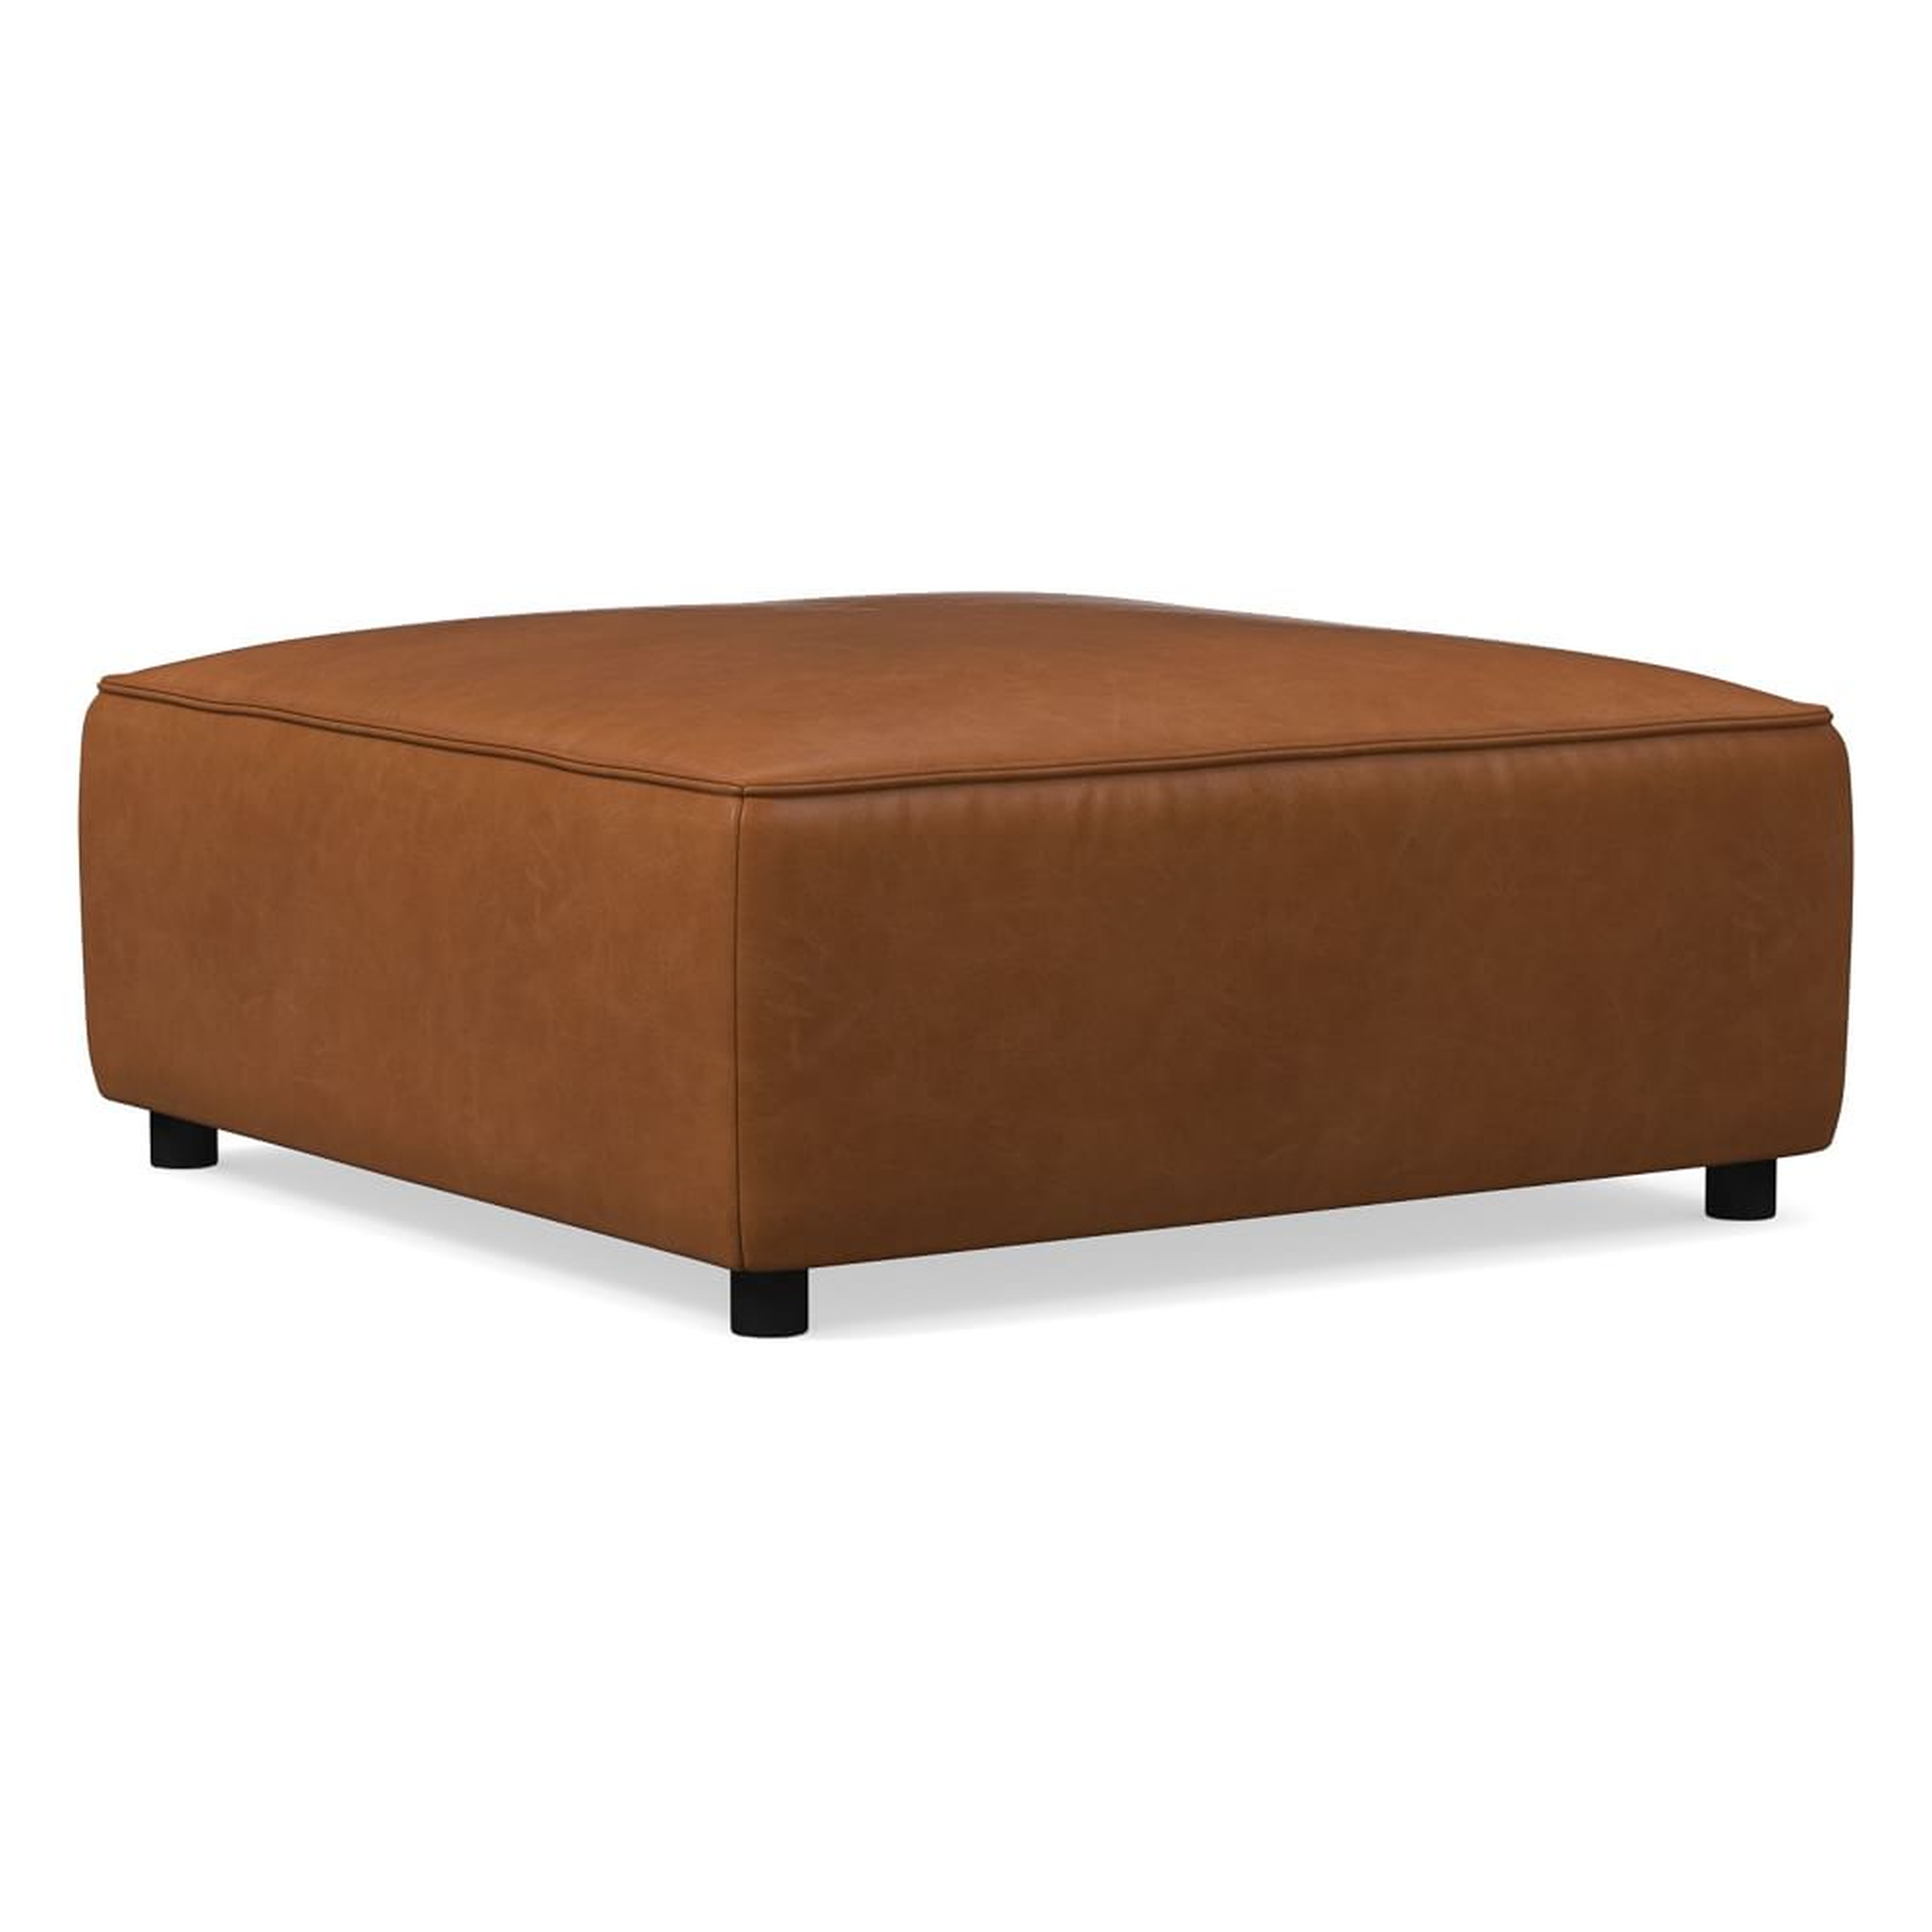 Remi Ottoman, Memory Foam, Ludlow Leather, Mace, Concealed Support - West Elm